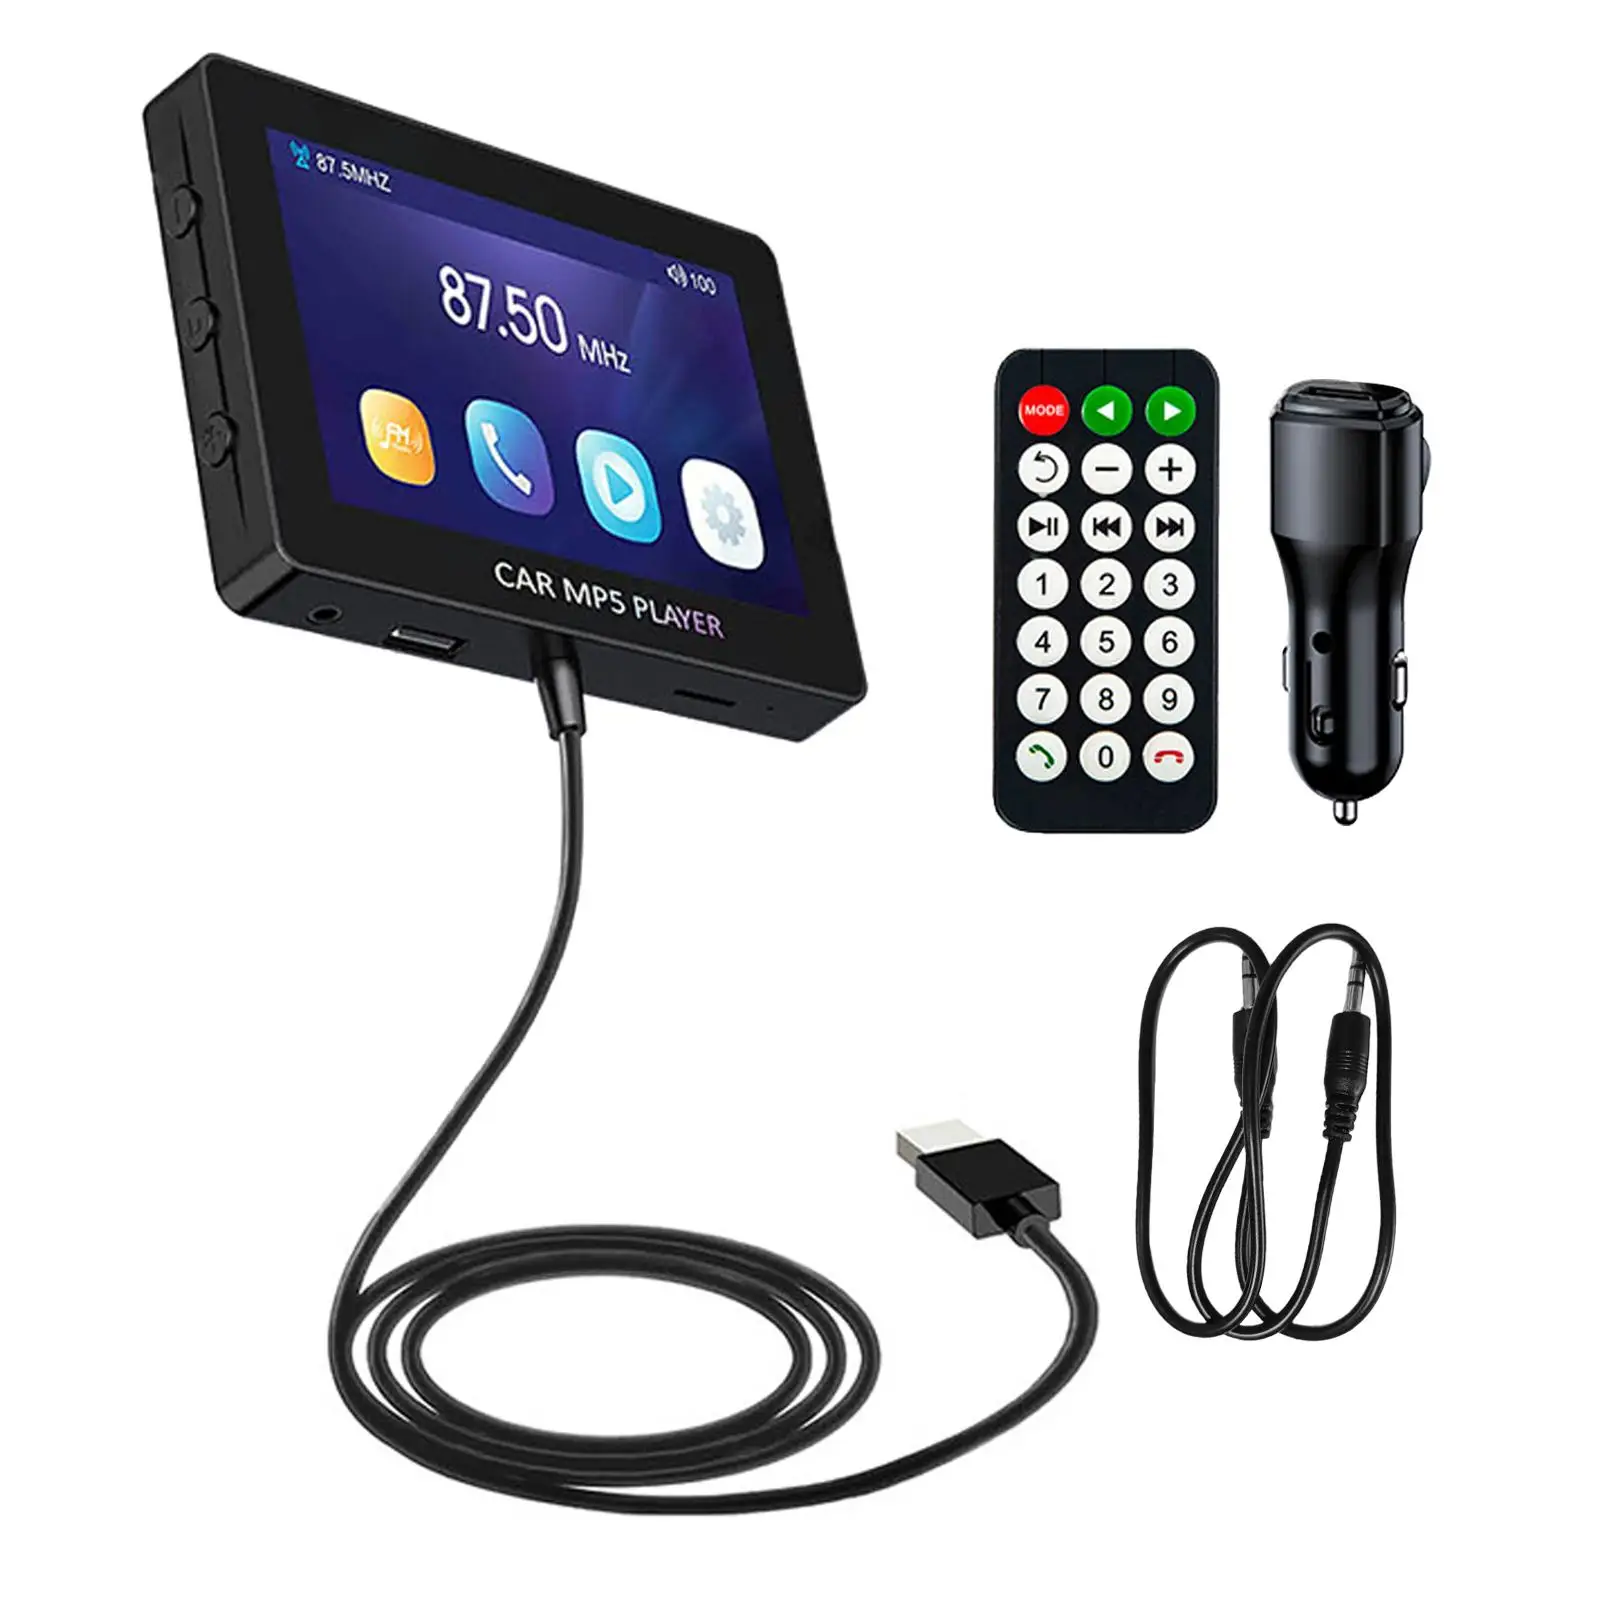 Car Video Player Display Screen Charging for Phone with Remote Control 4.3